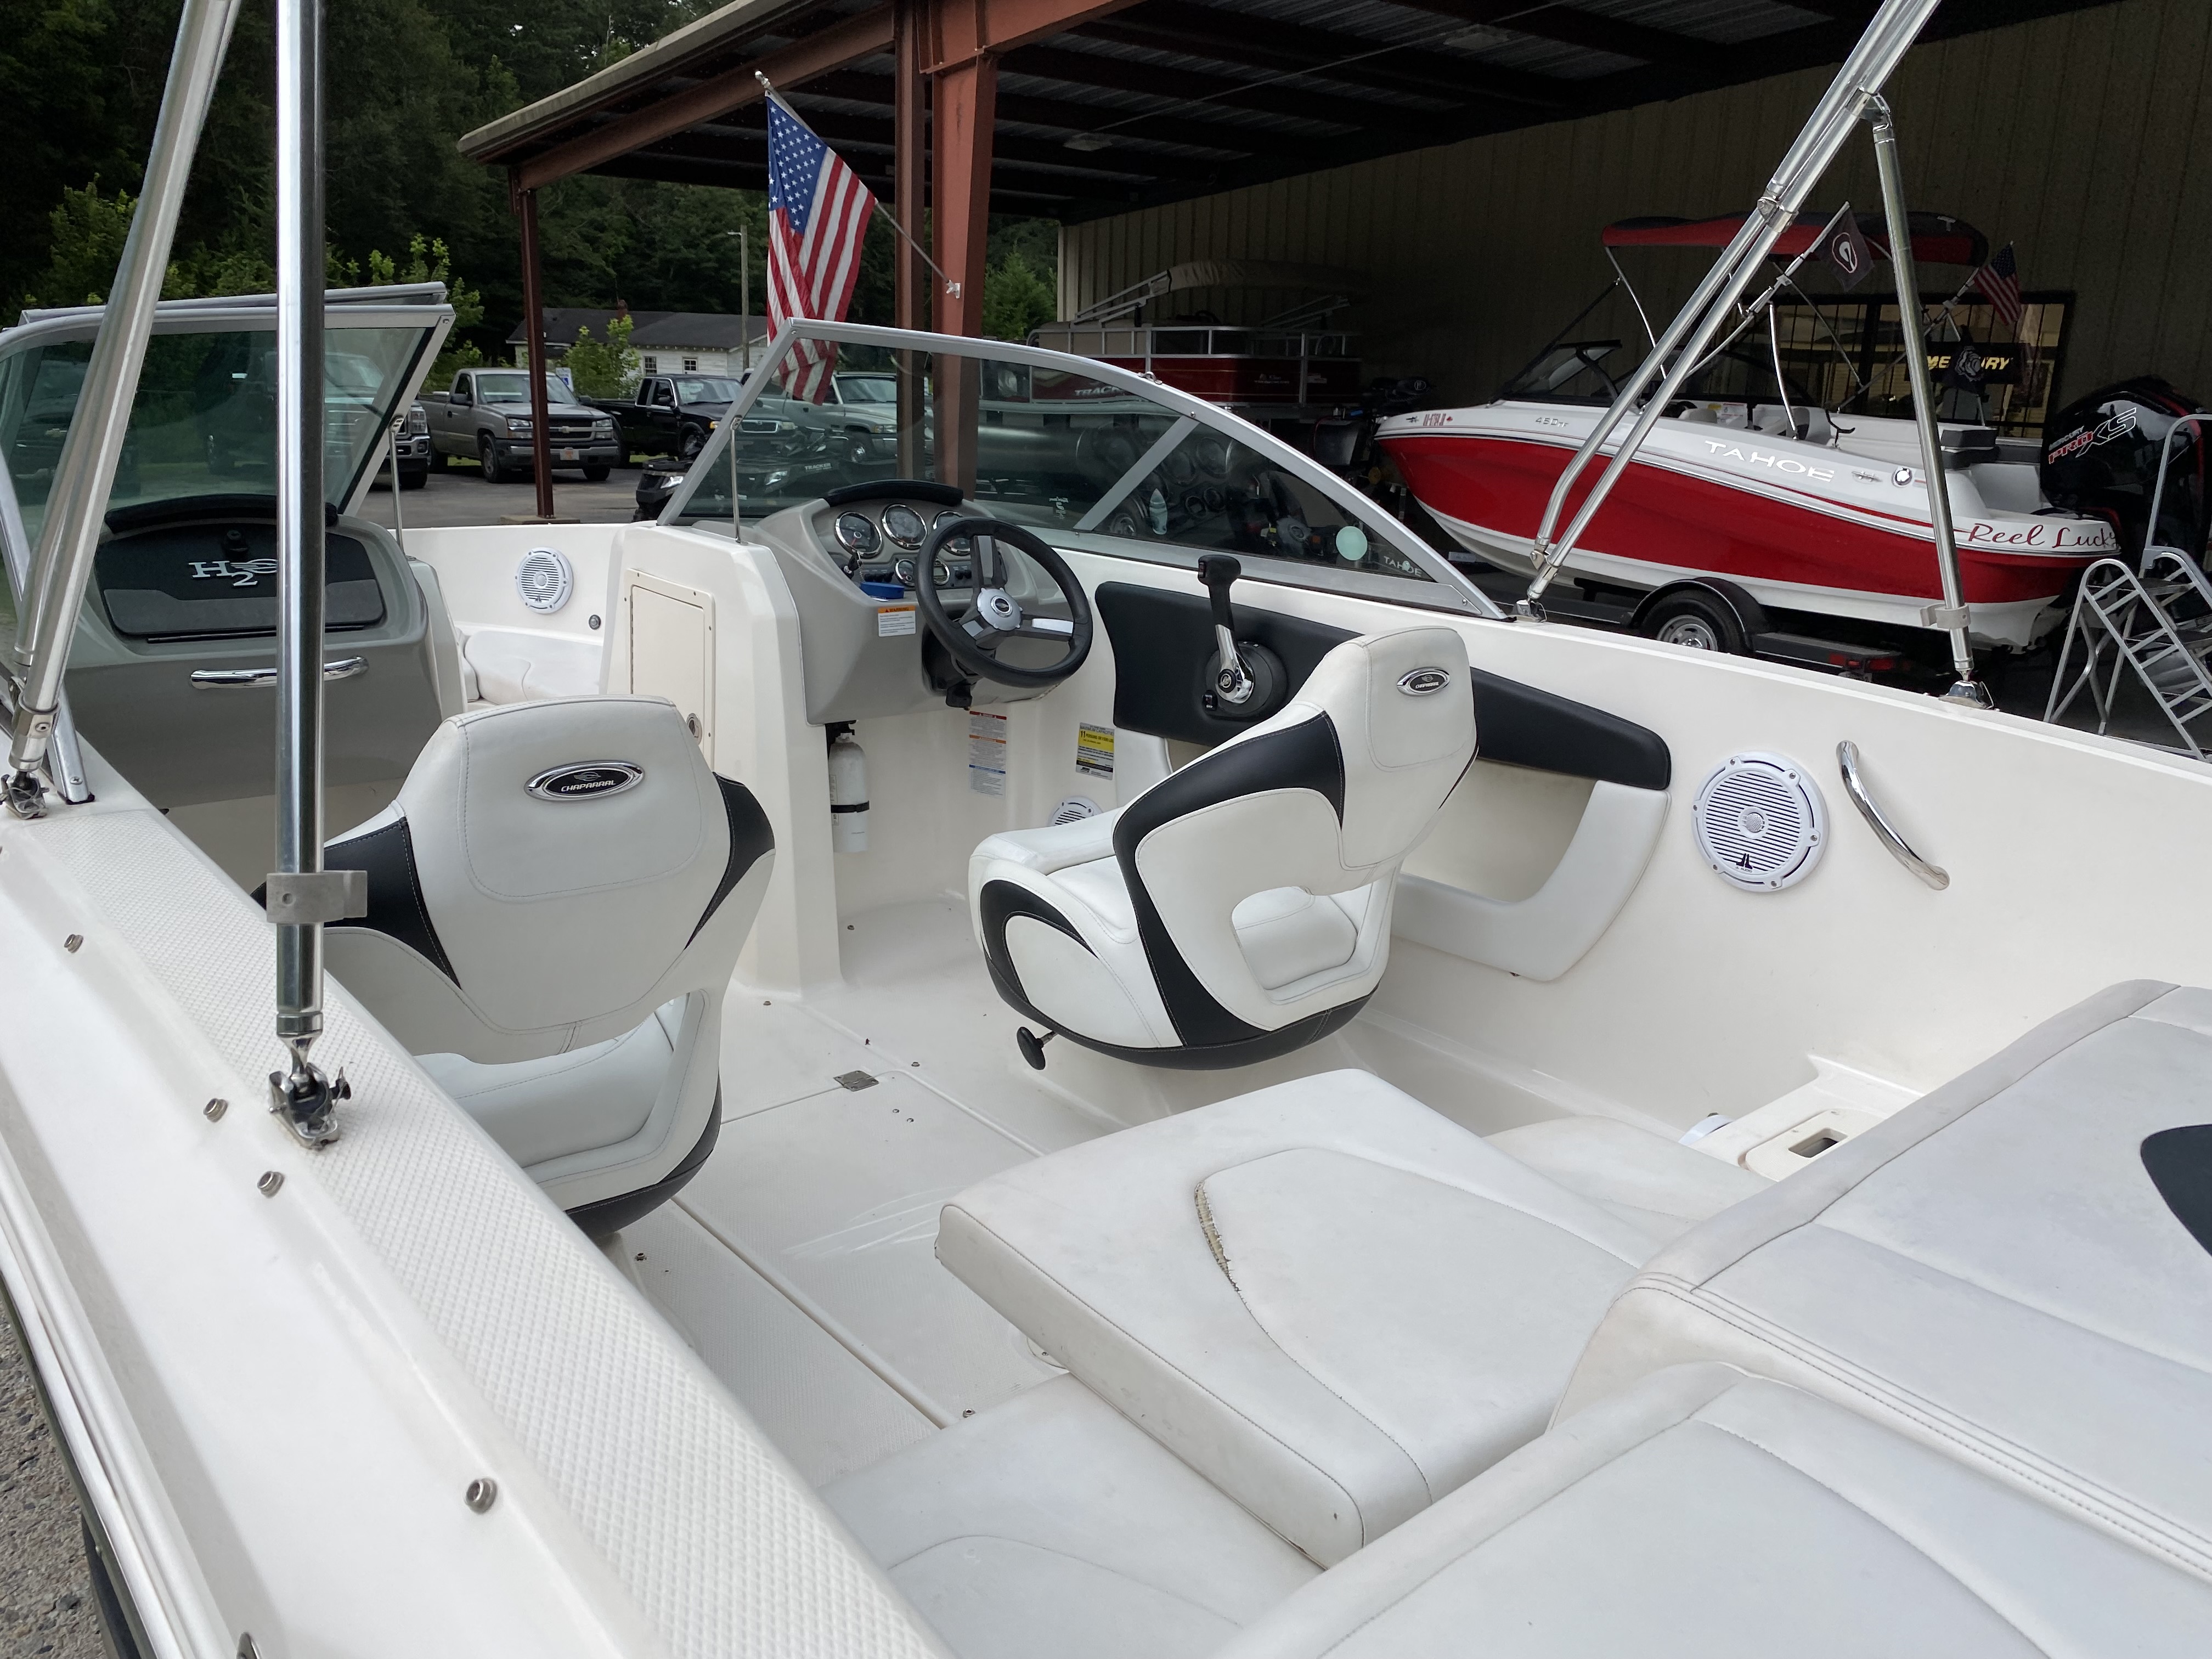 2016 Chaparral boat for sale, model of the boat is 19 H2O Sport & Image # 16 of 32